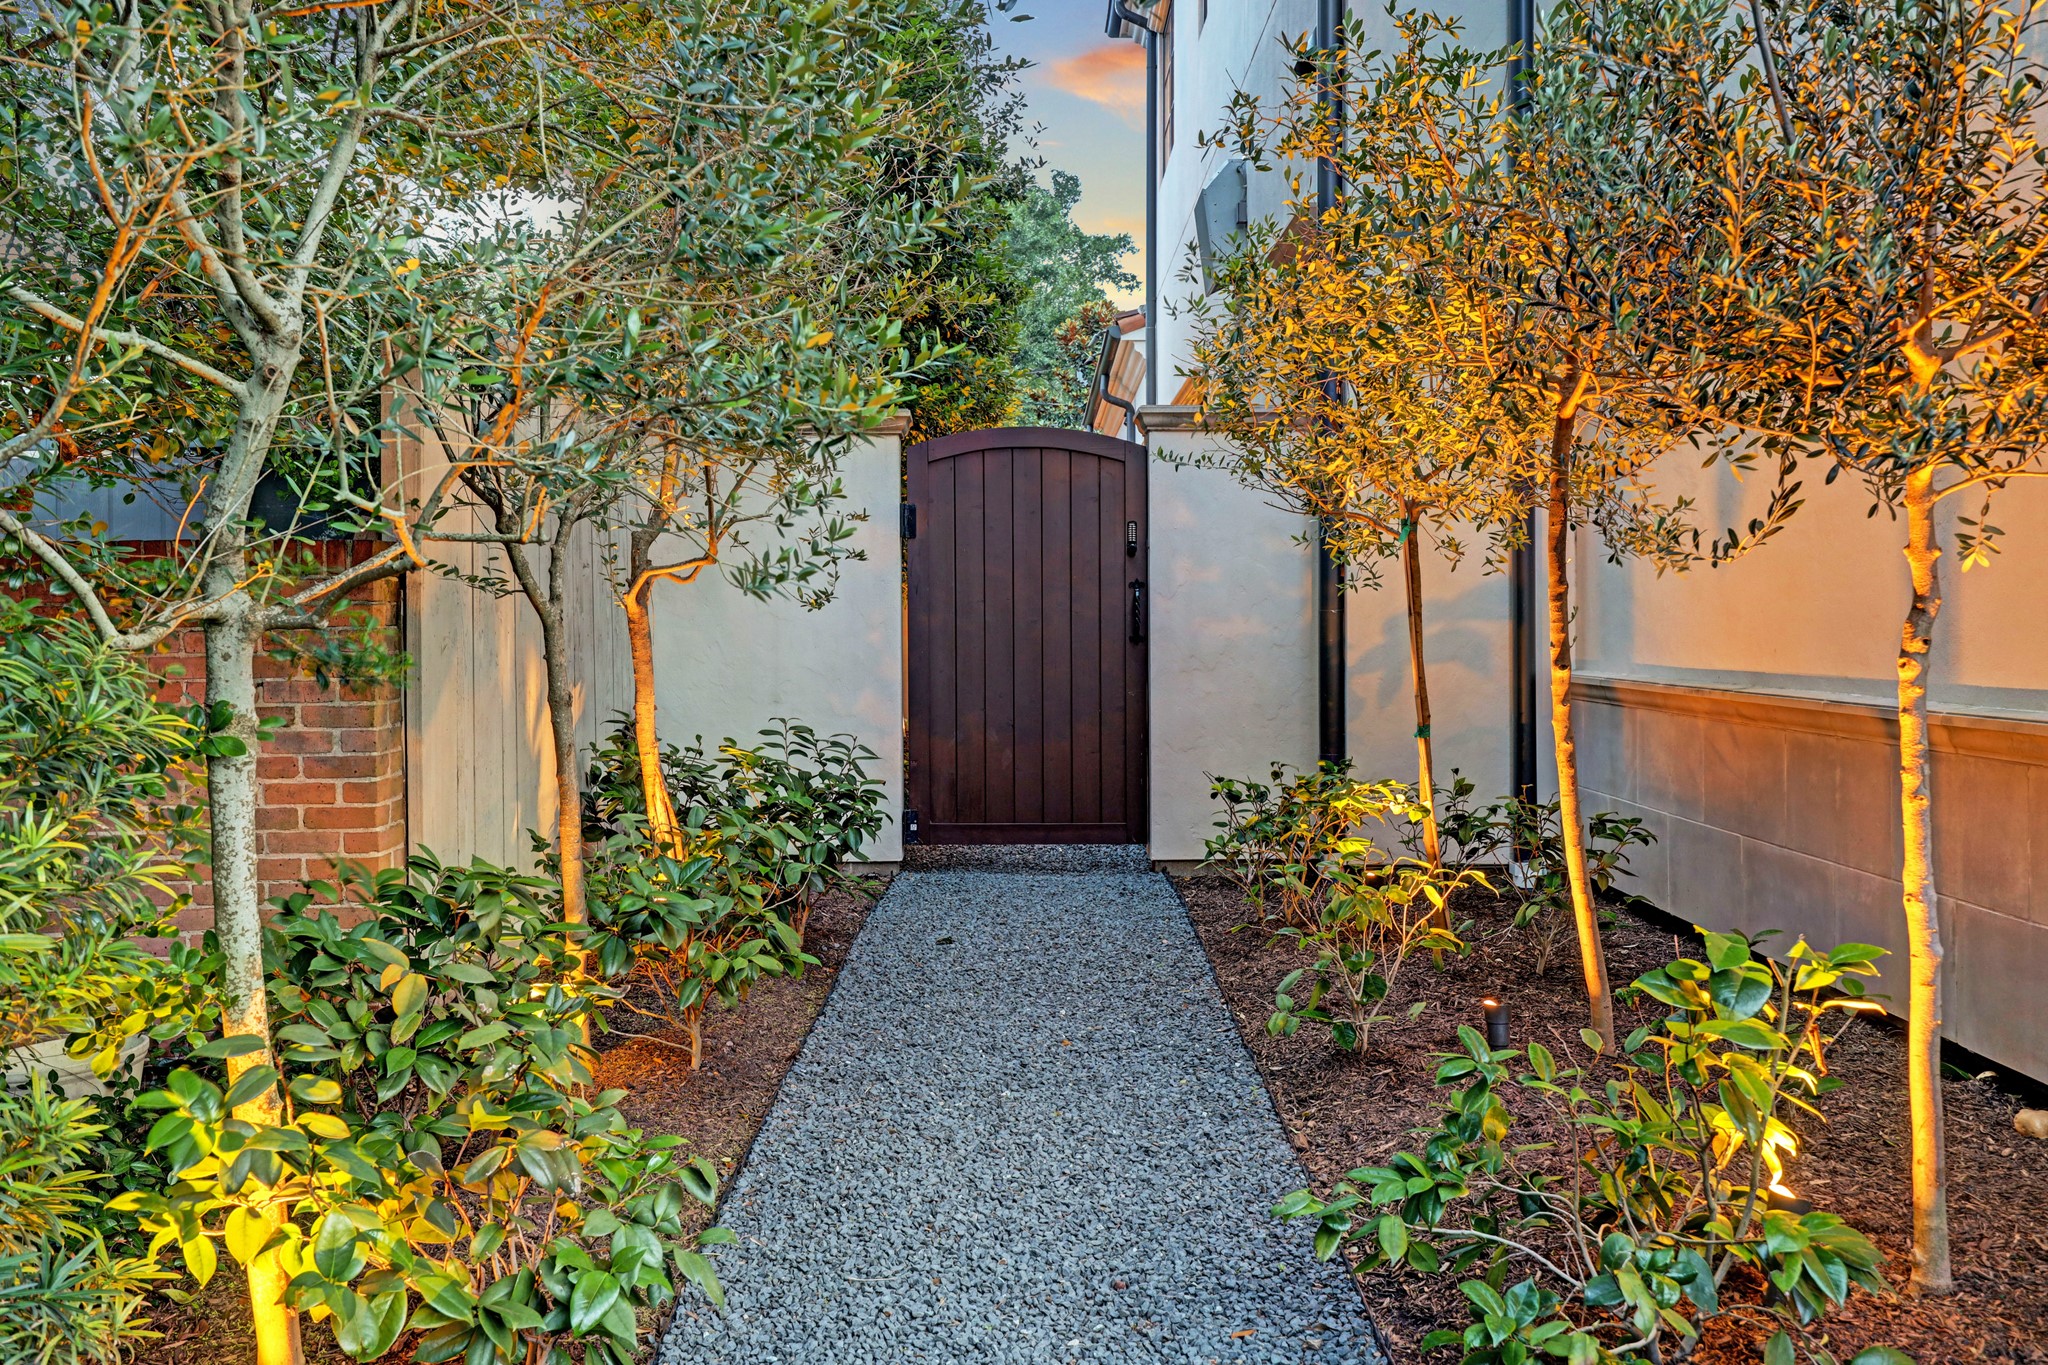 [Garden Gate]
This garden gate opens into the side patio with the standing water sculpture.